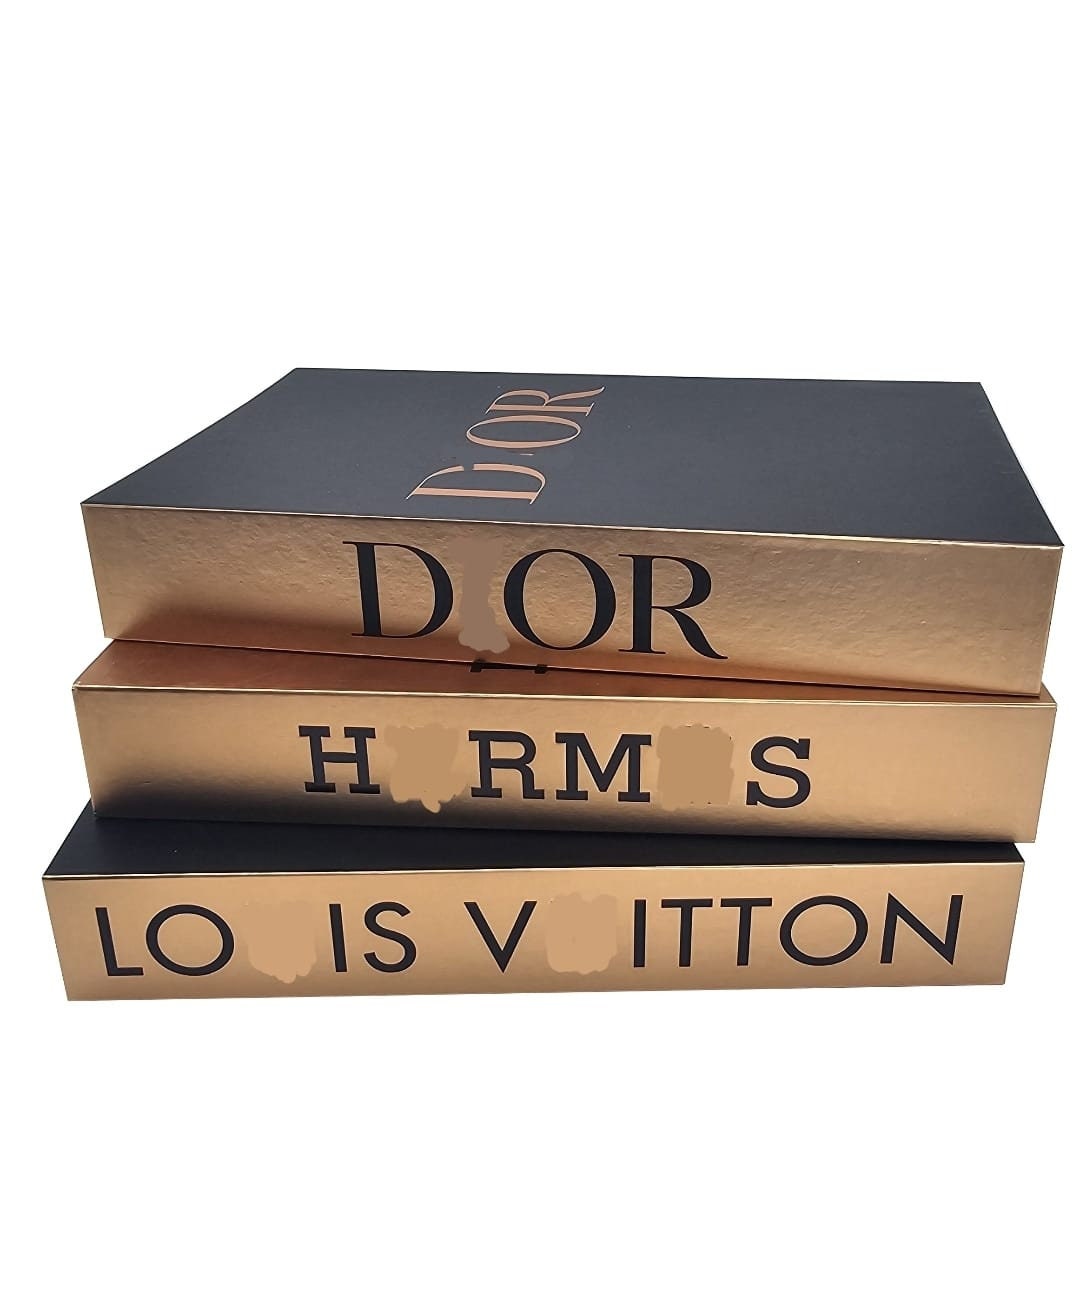 Fashion Inspired Decorative Books - Hardcover Fake Decorative Books for Coffee Table/Shelves with No Pages - Lightweight Aesthetic Book Display